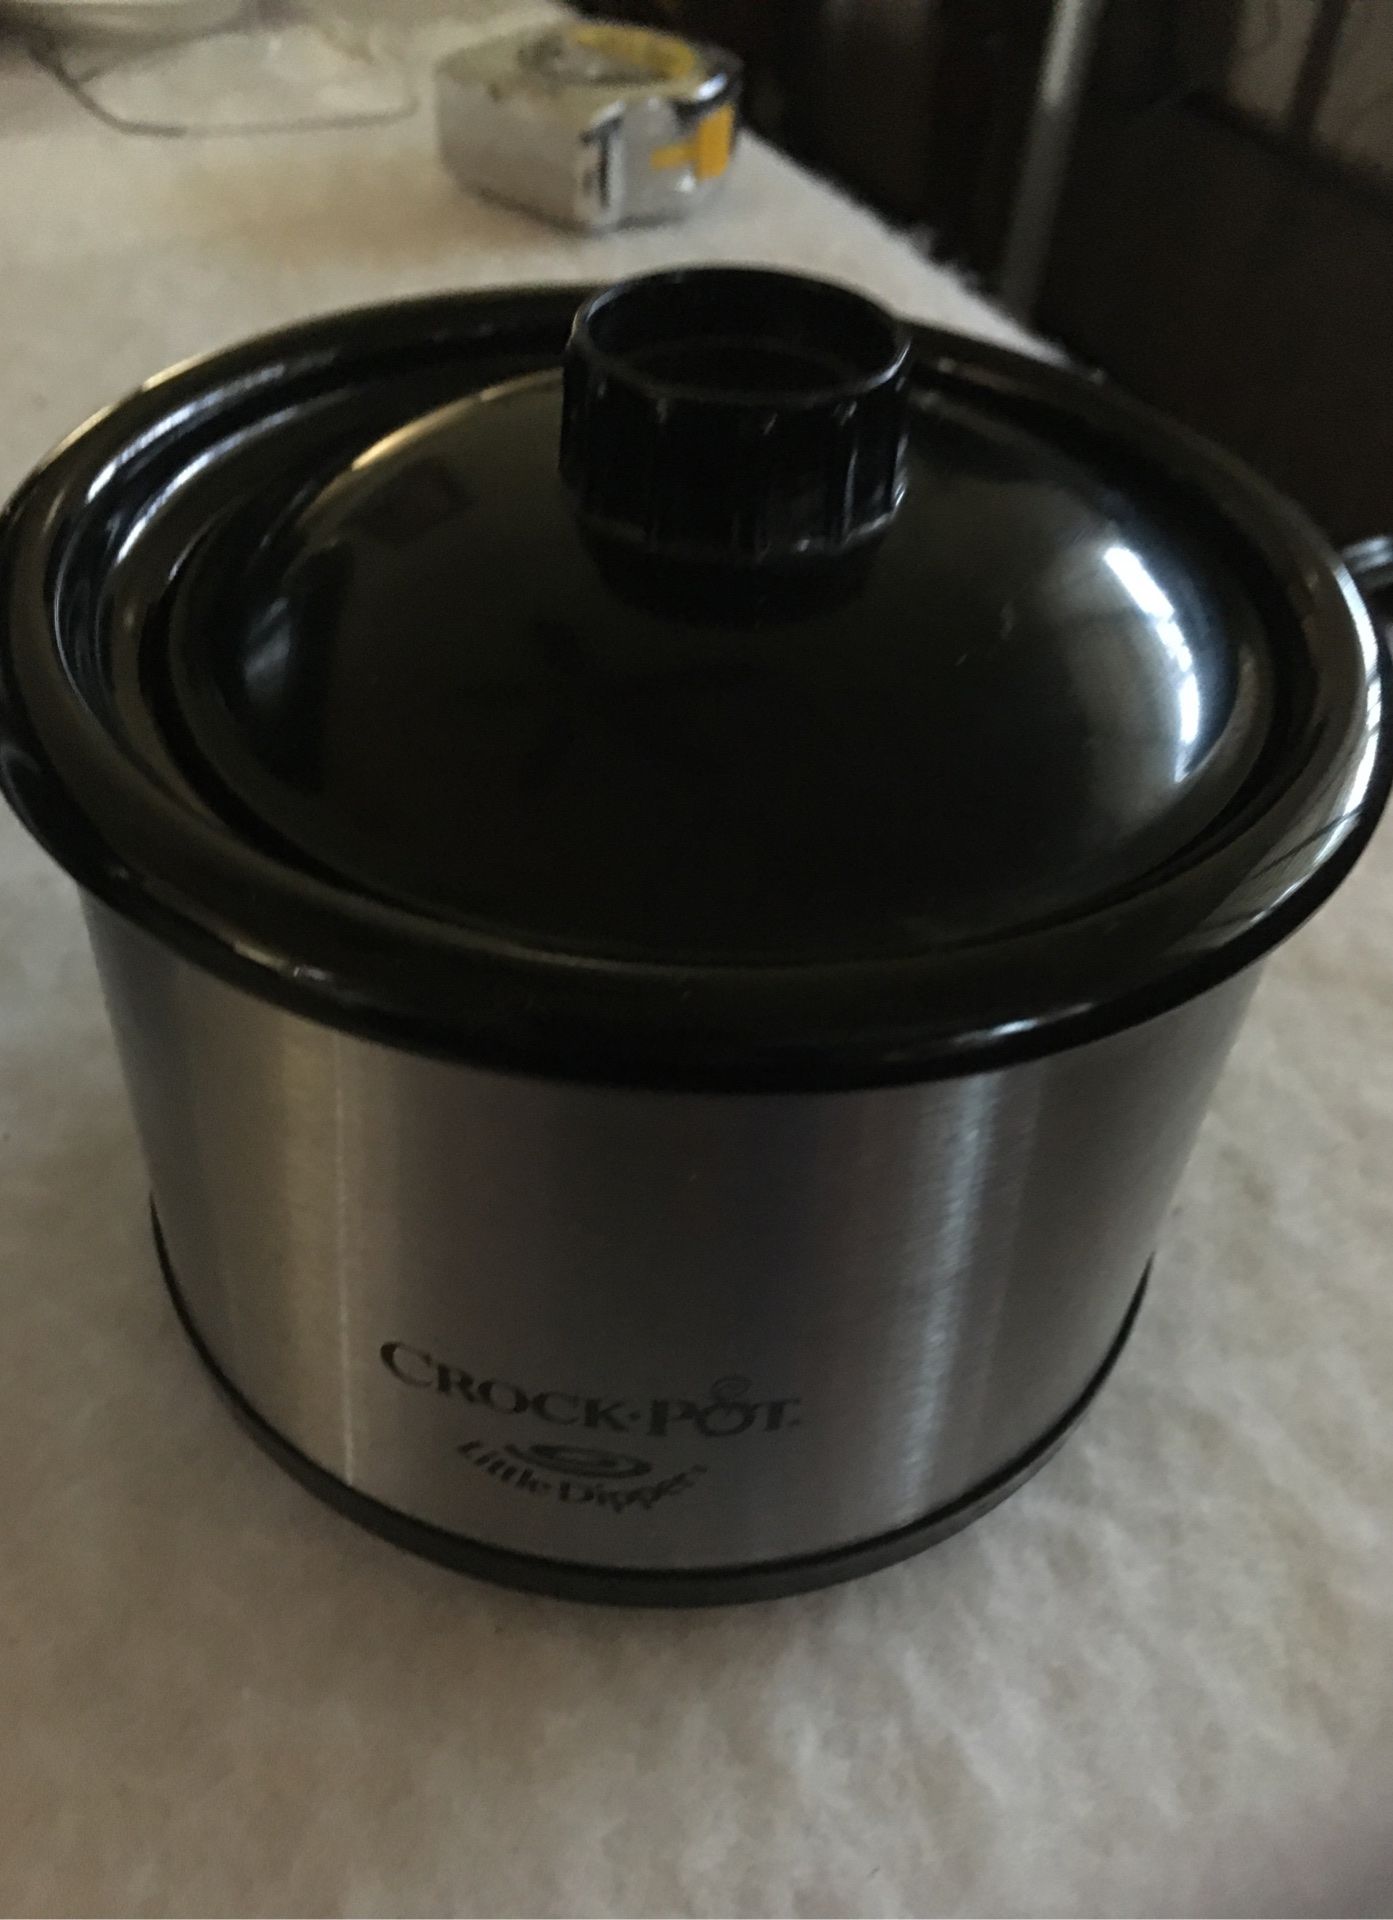 Slow Cooker in great working condition